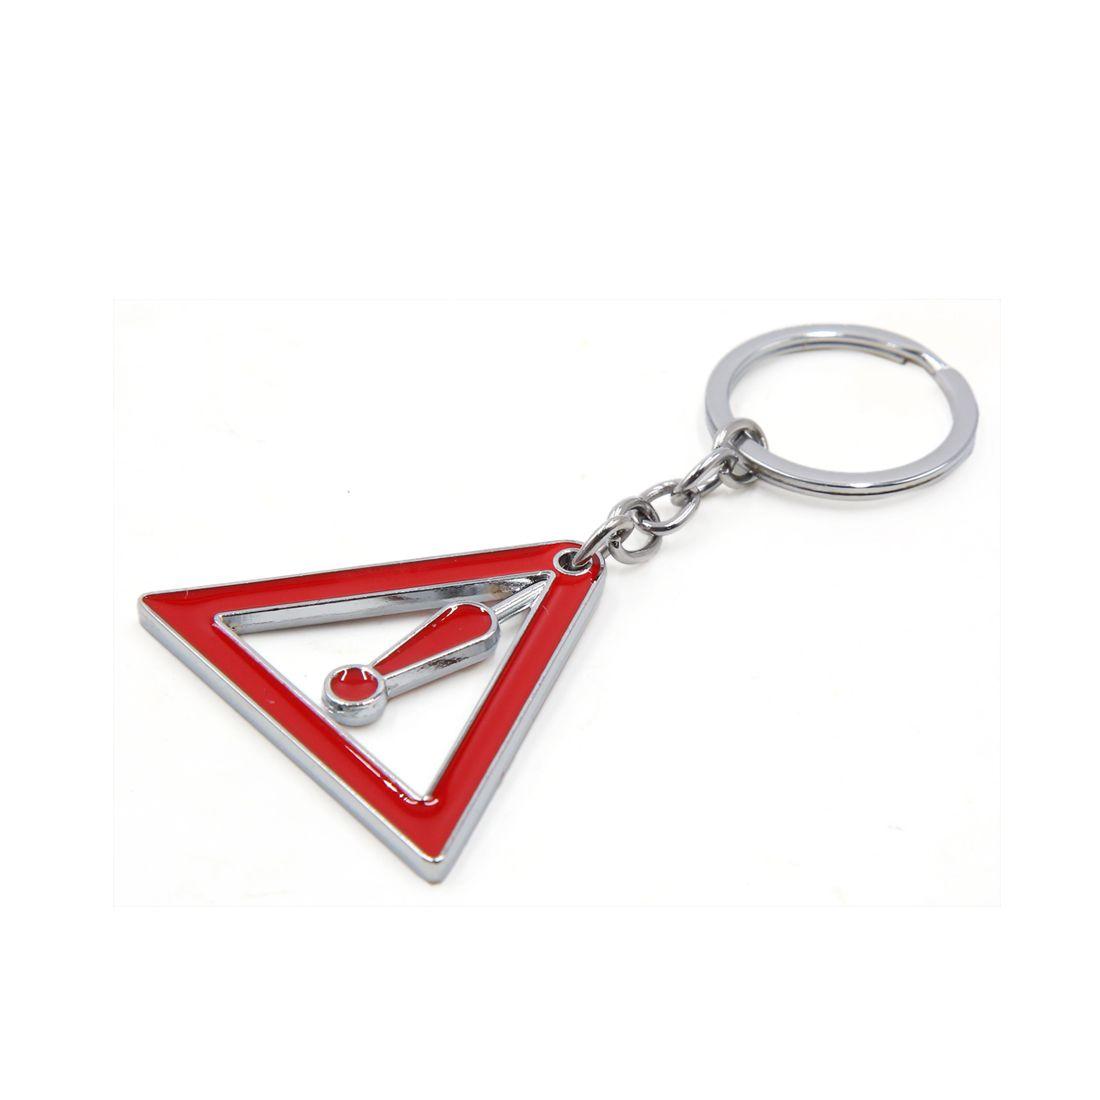 Silver Car with Red Triangle Logo - Portable Red Triangle Warning Sign Design Key Ring Keychain for Car